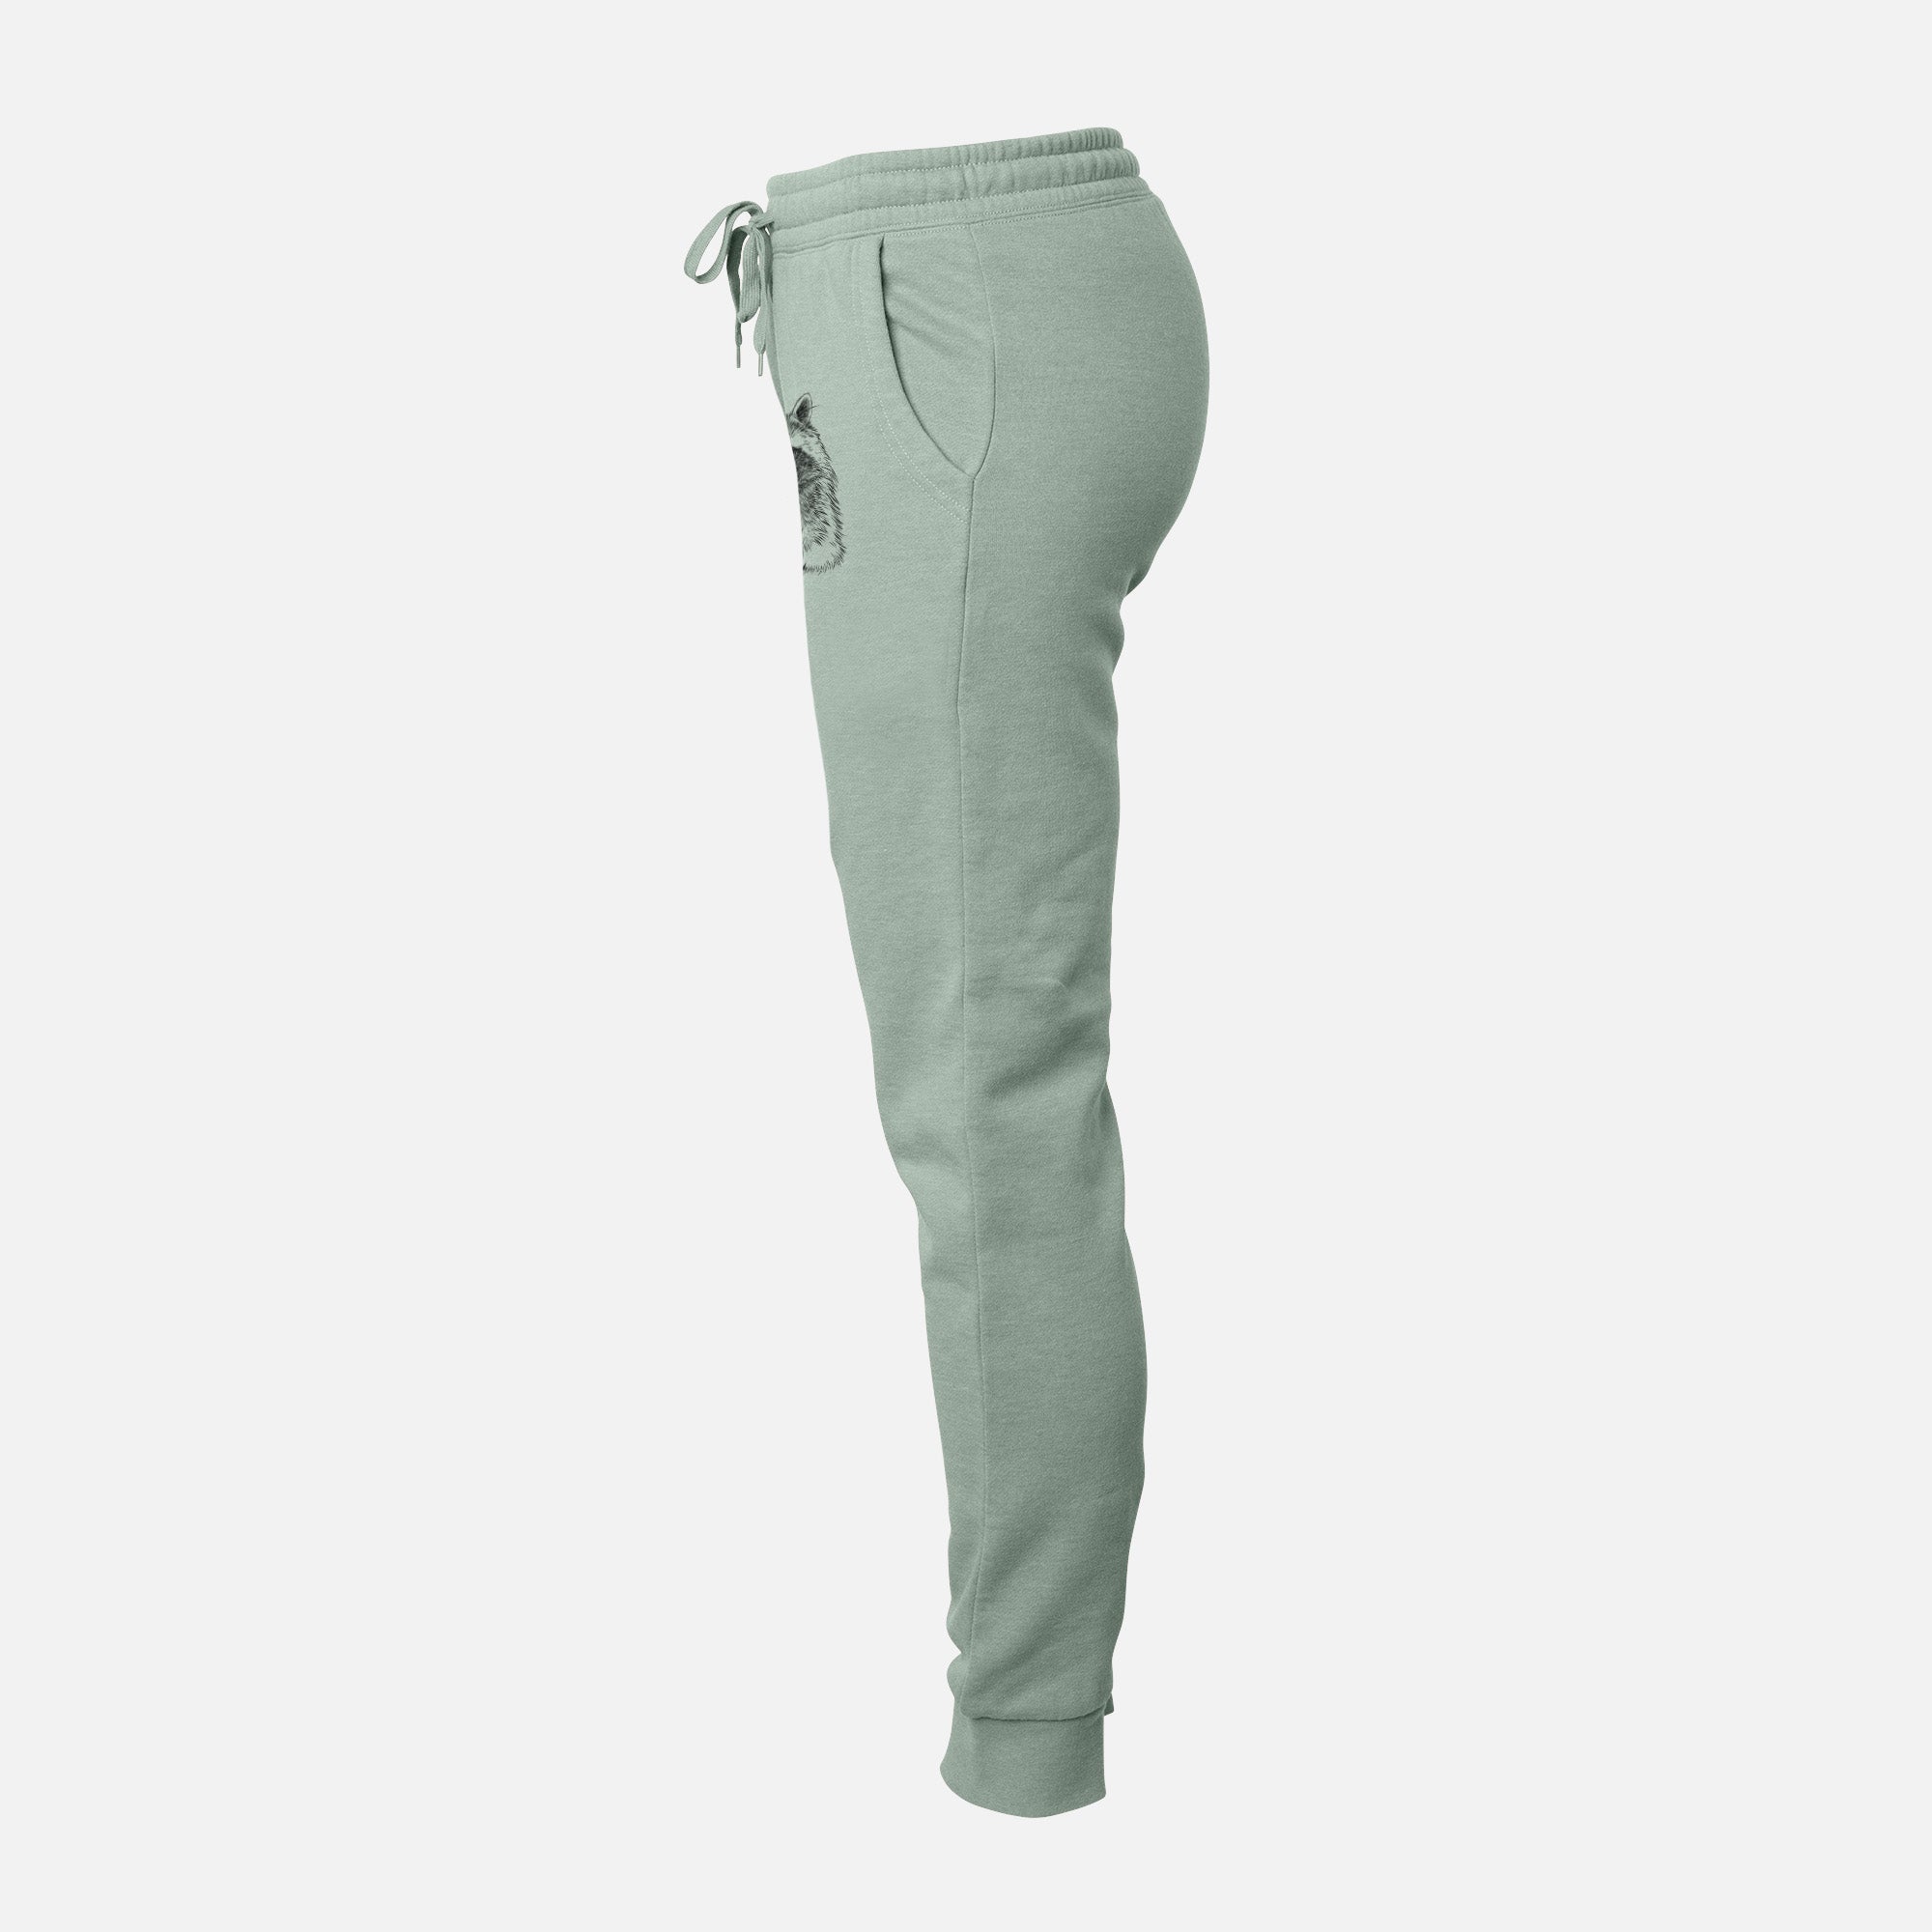 Quigley the Mixed Breed - Women's Cali Wave Joggers